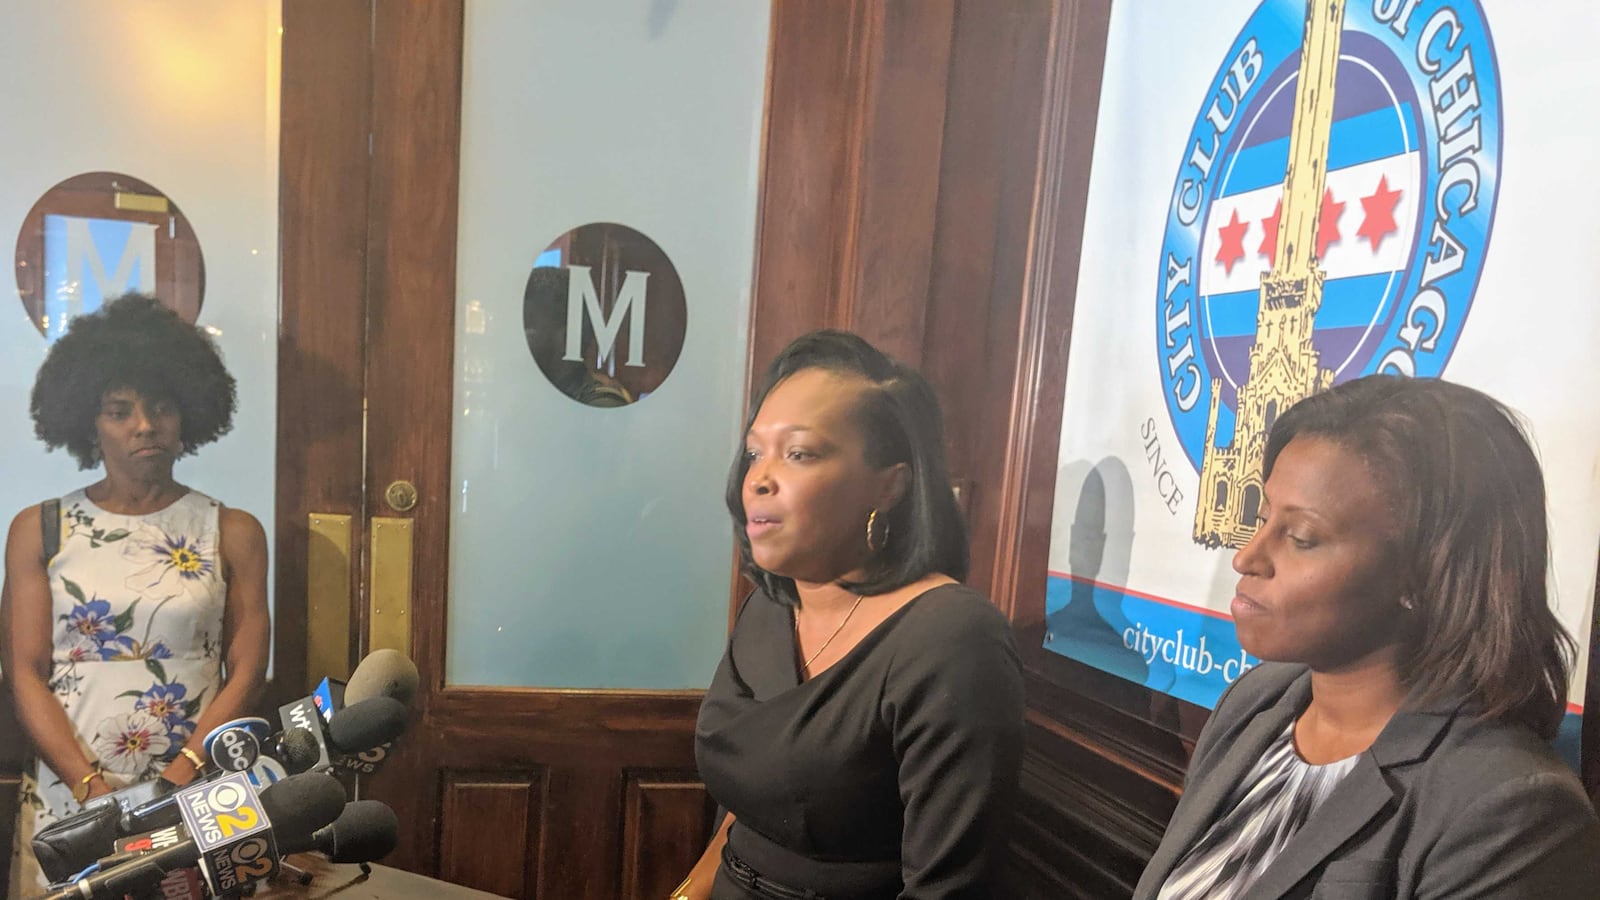 Schools CEO Janice Jackson speaks after a City Club of Chicago event Thursday. Deputy Mayor for Education and Human Services Sybil Madison is to her left, and the district's Chief Academic Officer LaTanya McDade stands to her right.